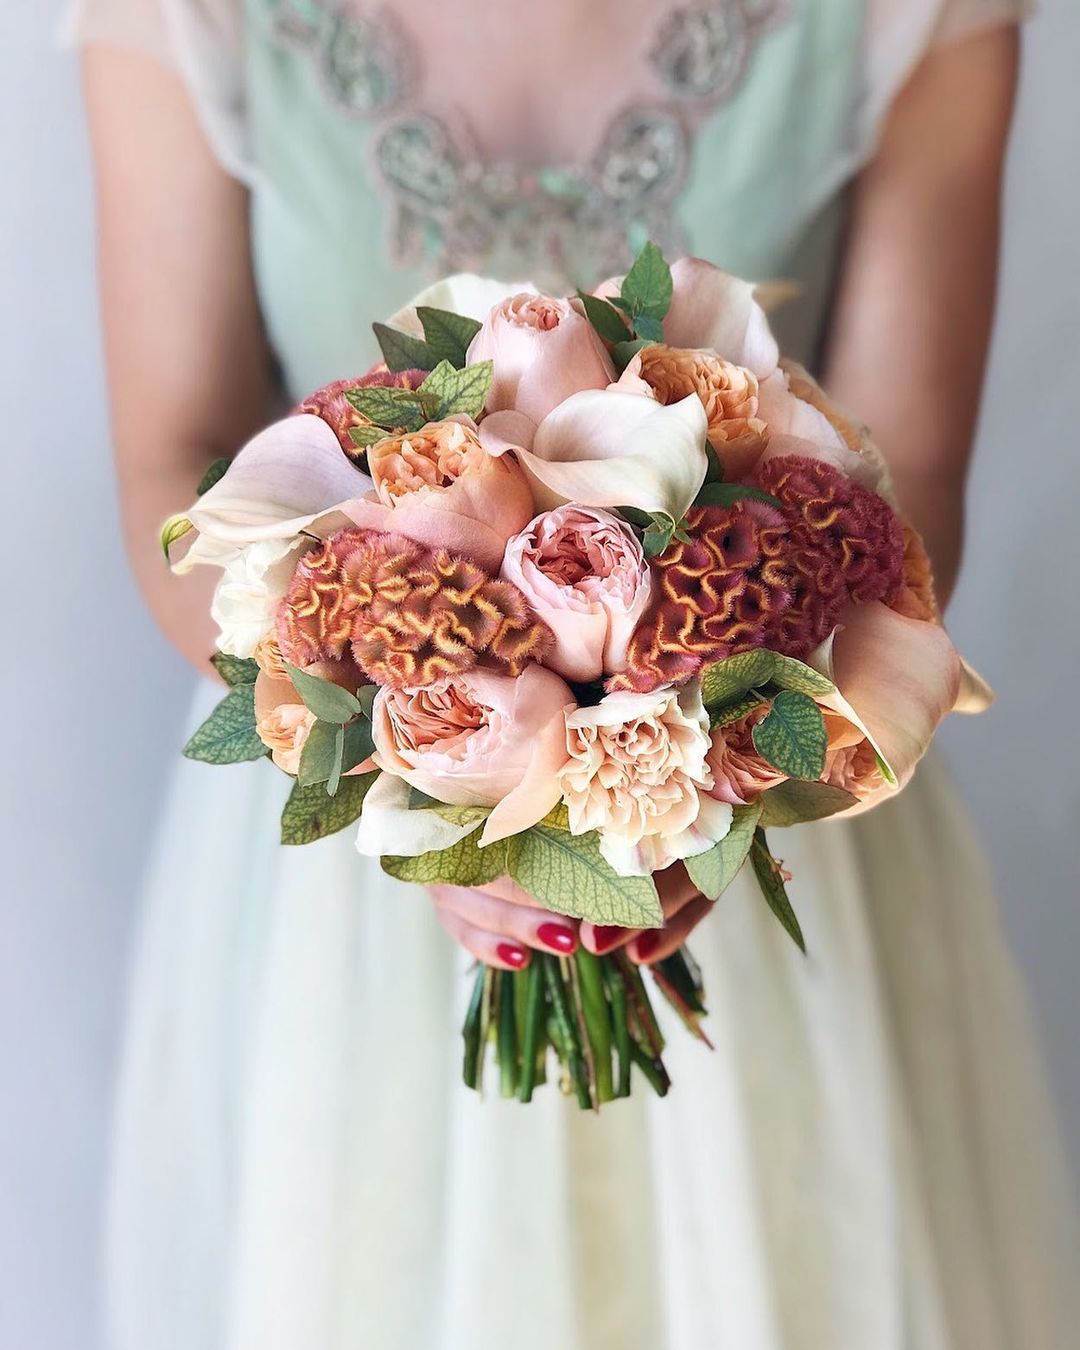 wedding bouquet ideas inspiration bouquets with lilies ideas